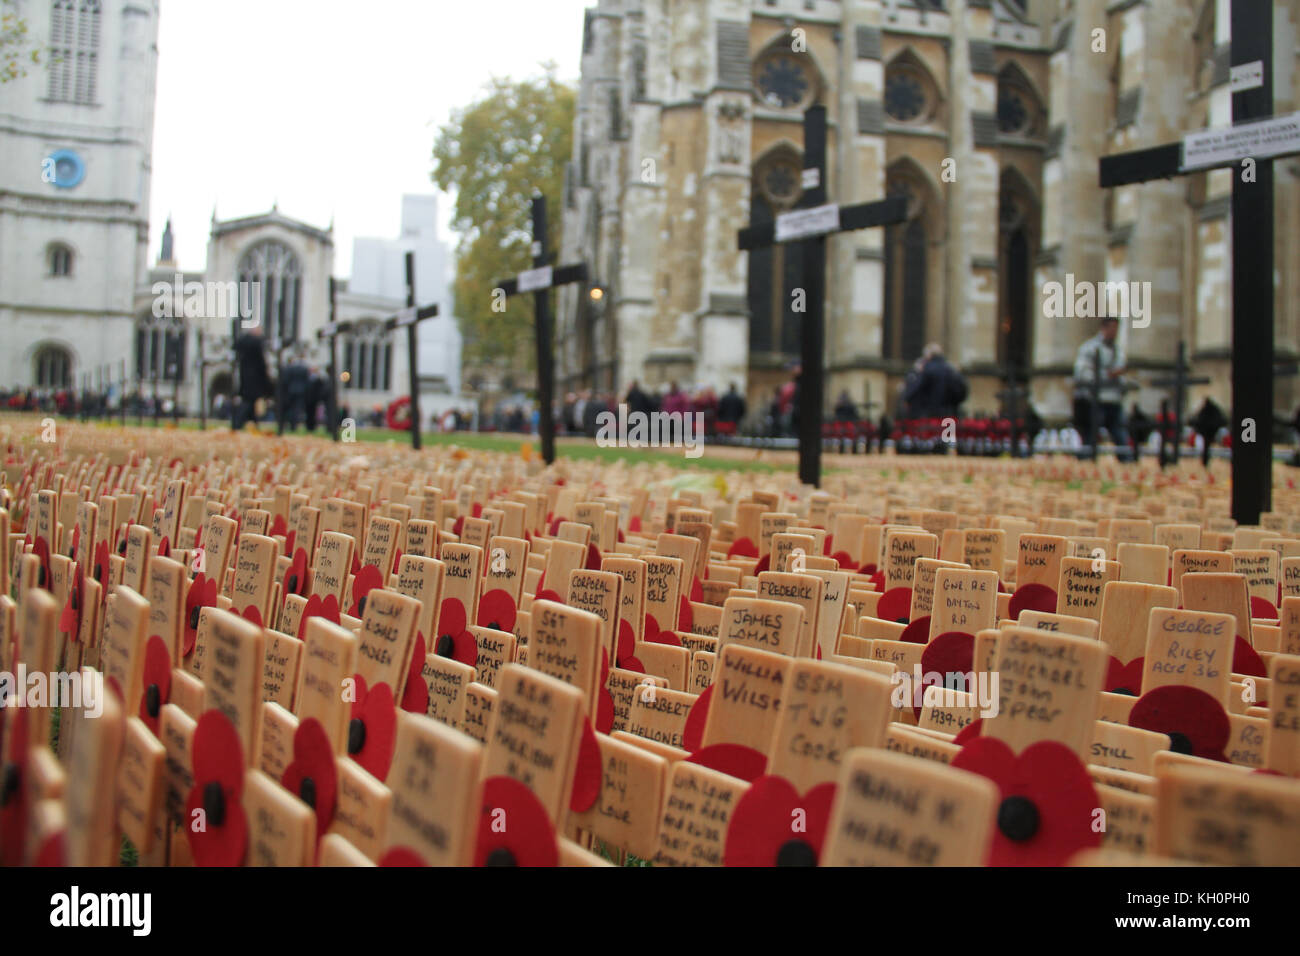 London, UK. 11th Nov, 2017. Thousands of crosses planted at the Fields of Remembrance at Westminster Abbey in London to remember the men and women who have lost their lives in conflict. on November 11, 2017. The first official Armistice Day was subsequently held on November 11, 1919 on the grounds of Buckingham Palace. Credit: david mbiyu/Alamy Live News Stock Photo